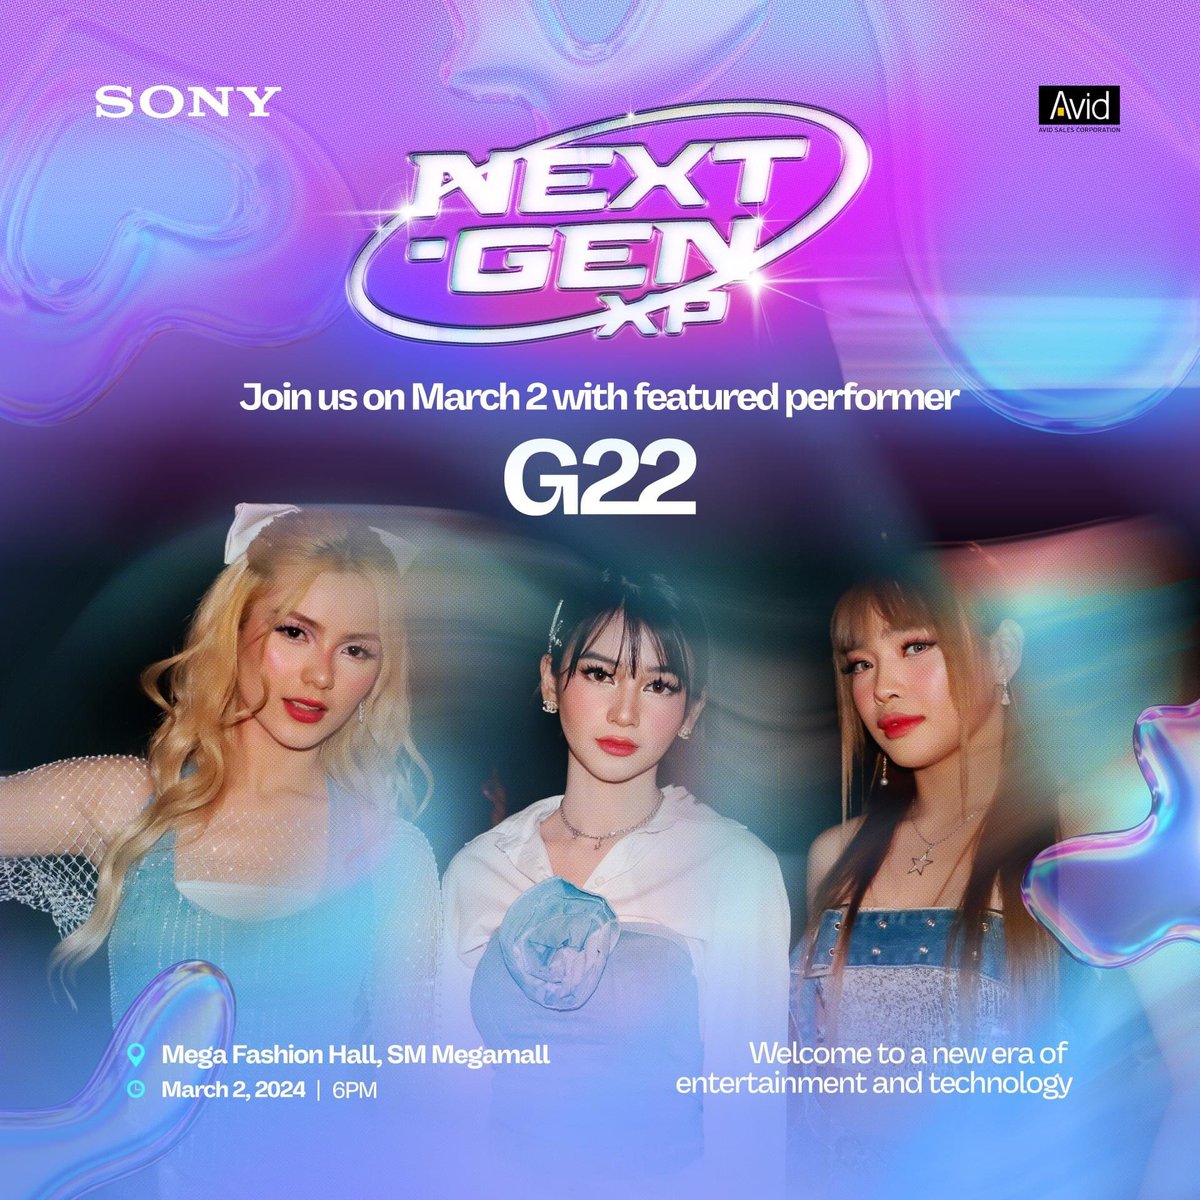 G22 takes center stage for Sony Next-Gen XP on March 2 at Mega Fashion Hall, SM Megamall! 

The event is FREE and open to the public.
TARAAAAA!!!

📍 SM Megamall, Fashion Hall
🗓 March 2, 10AM to 10PM

Click here to join: facebook.com/events/9277089…

#G22 #SonyNextGeneration #SonyPH